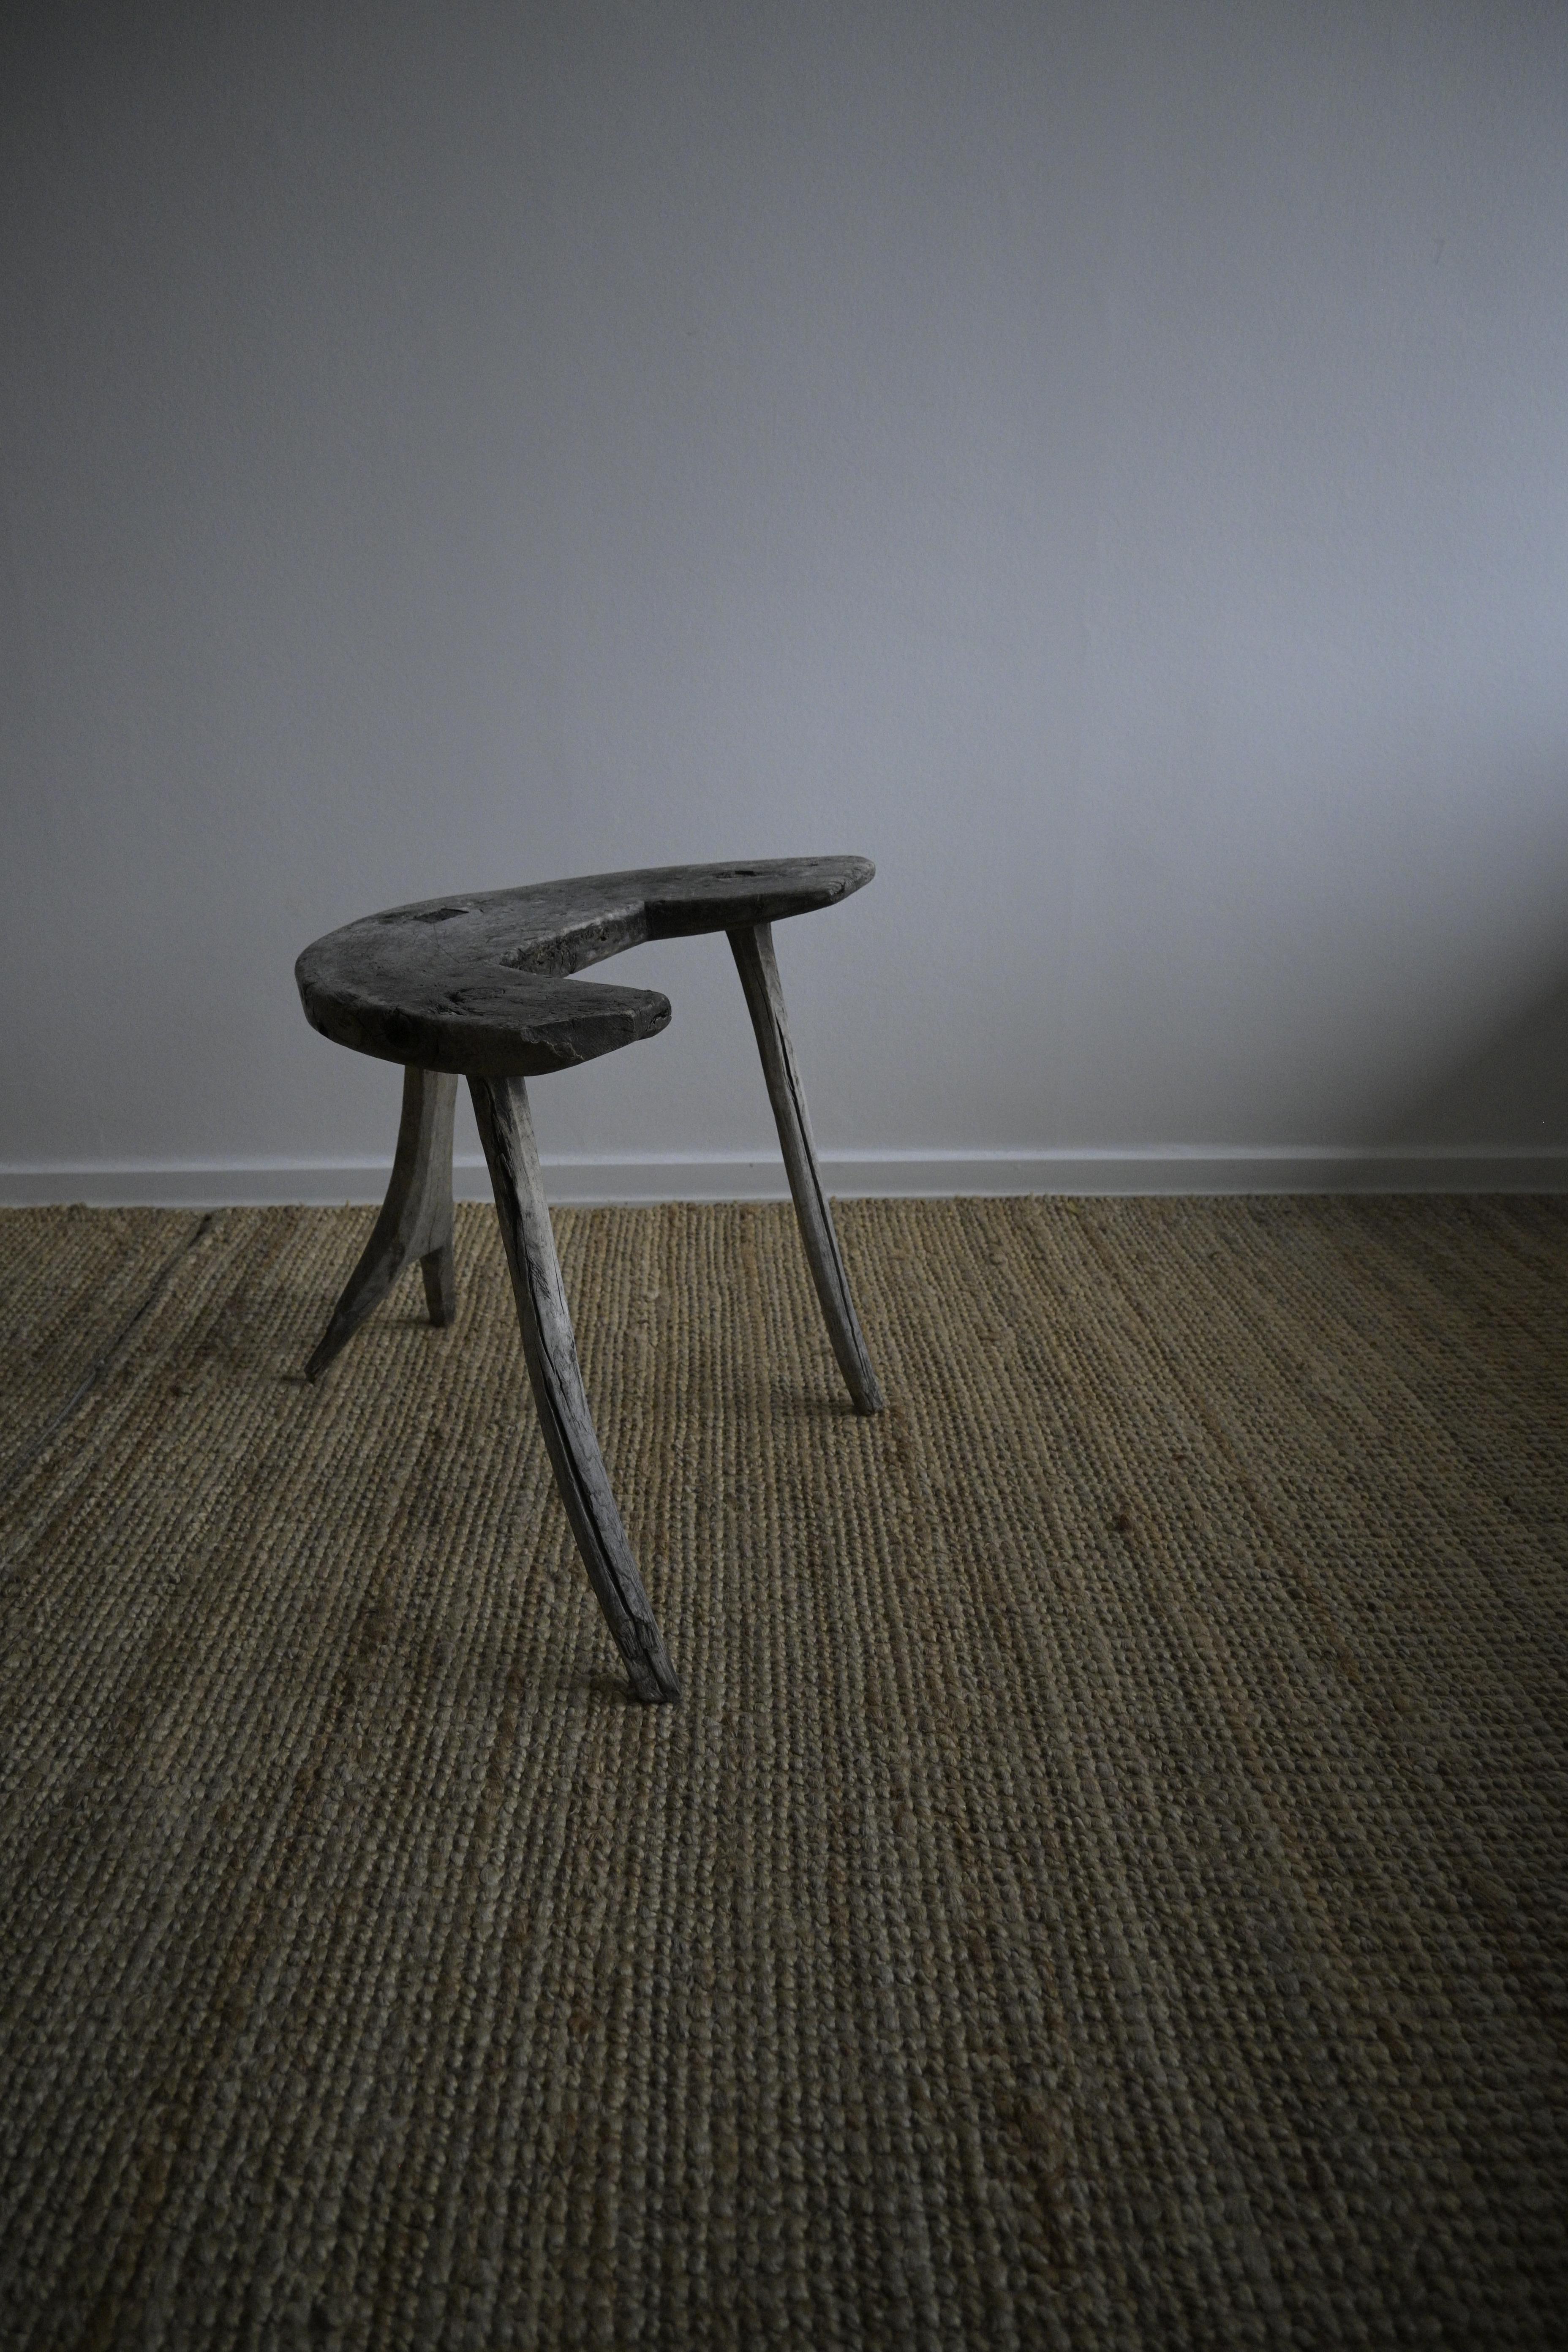 A Swedish Primitive Milking Stool ca1850-1880s

Featuring a beautiful gray tone acquired through time and sun exposure, along with distinctive quirky legs

Sold as is condition

Heigth: 43 cm / inch
Width: 49 cm / inch
Depth: 36 cm / inch